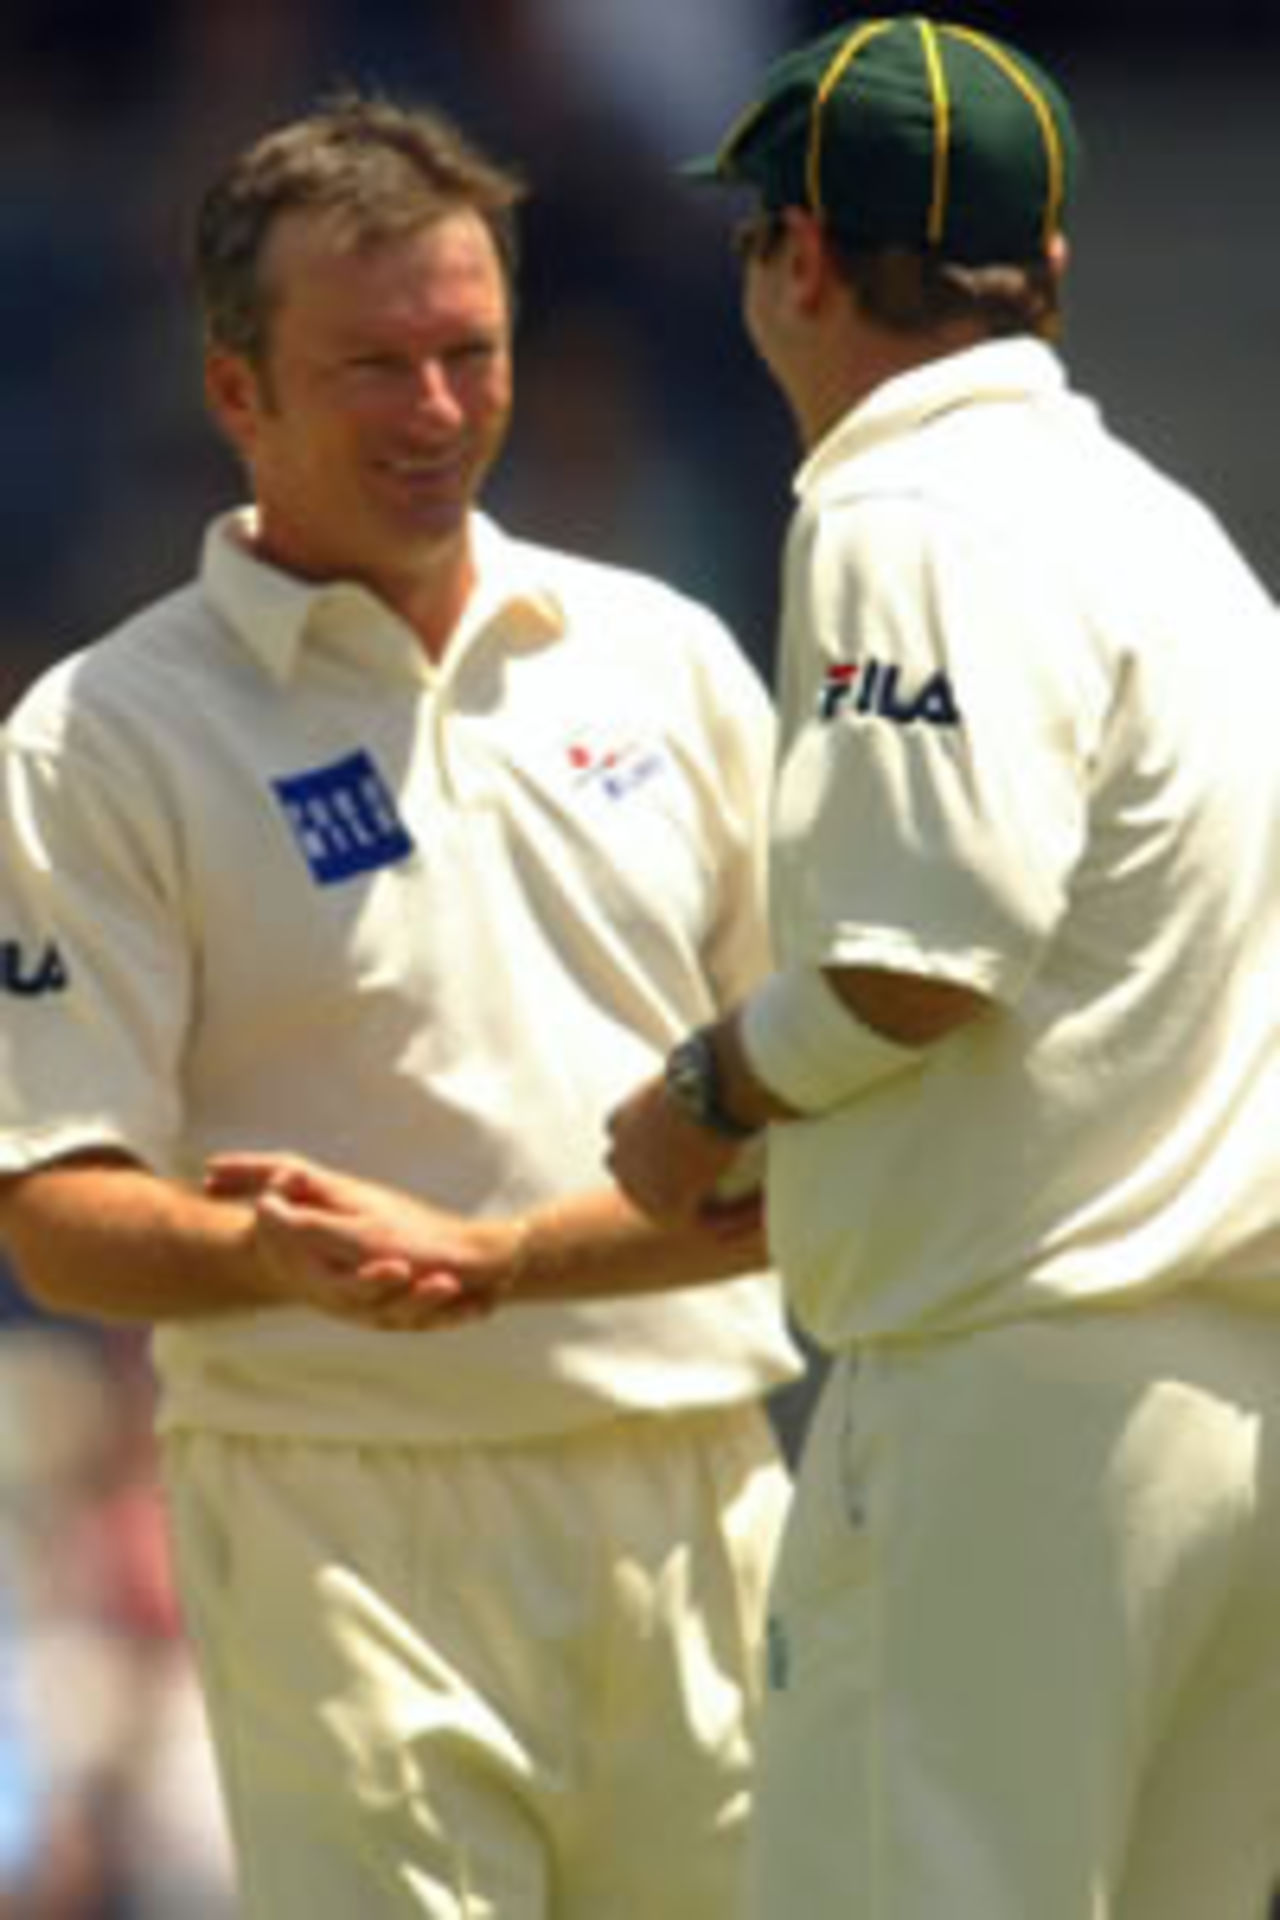 Steve Waugh of PM's XI celebrates with team mates Cade Brown after the wicket of Pathan of India caught Mark Cleary during the Prime Minister's XI against Inida cricket match on January 28, 2004 at Manuka Oval in Canberra, Australia.